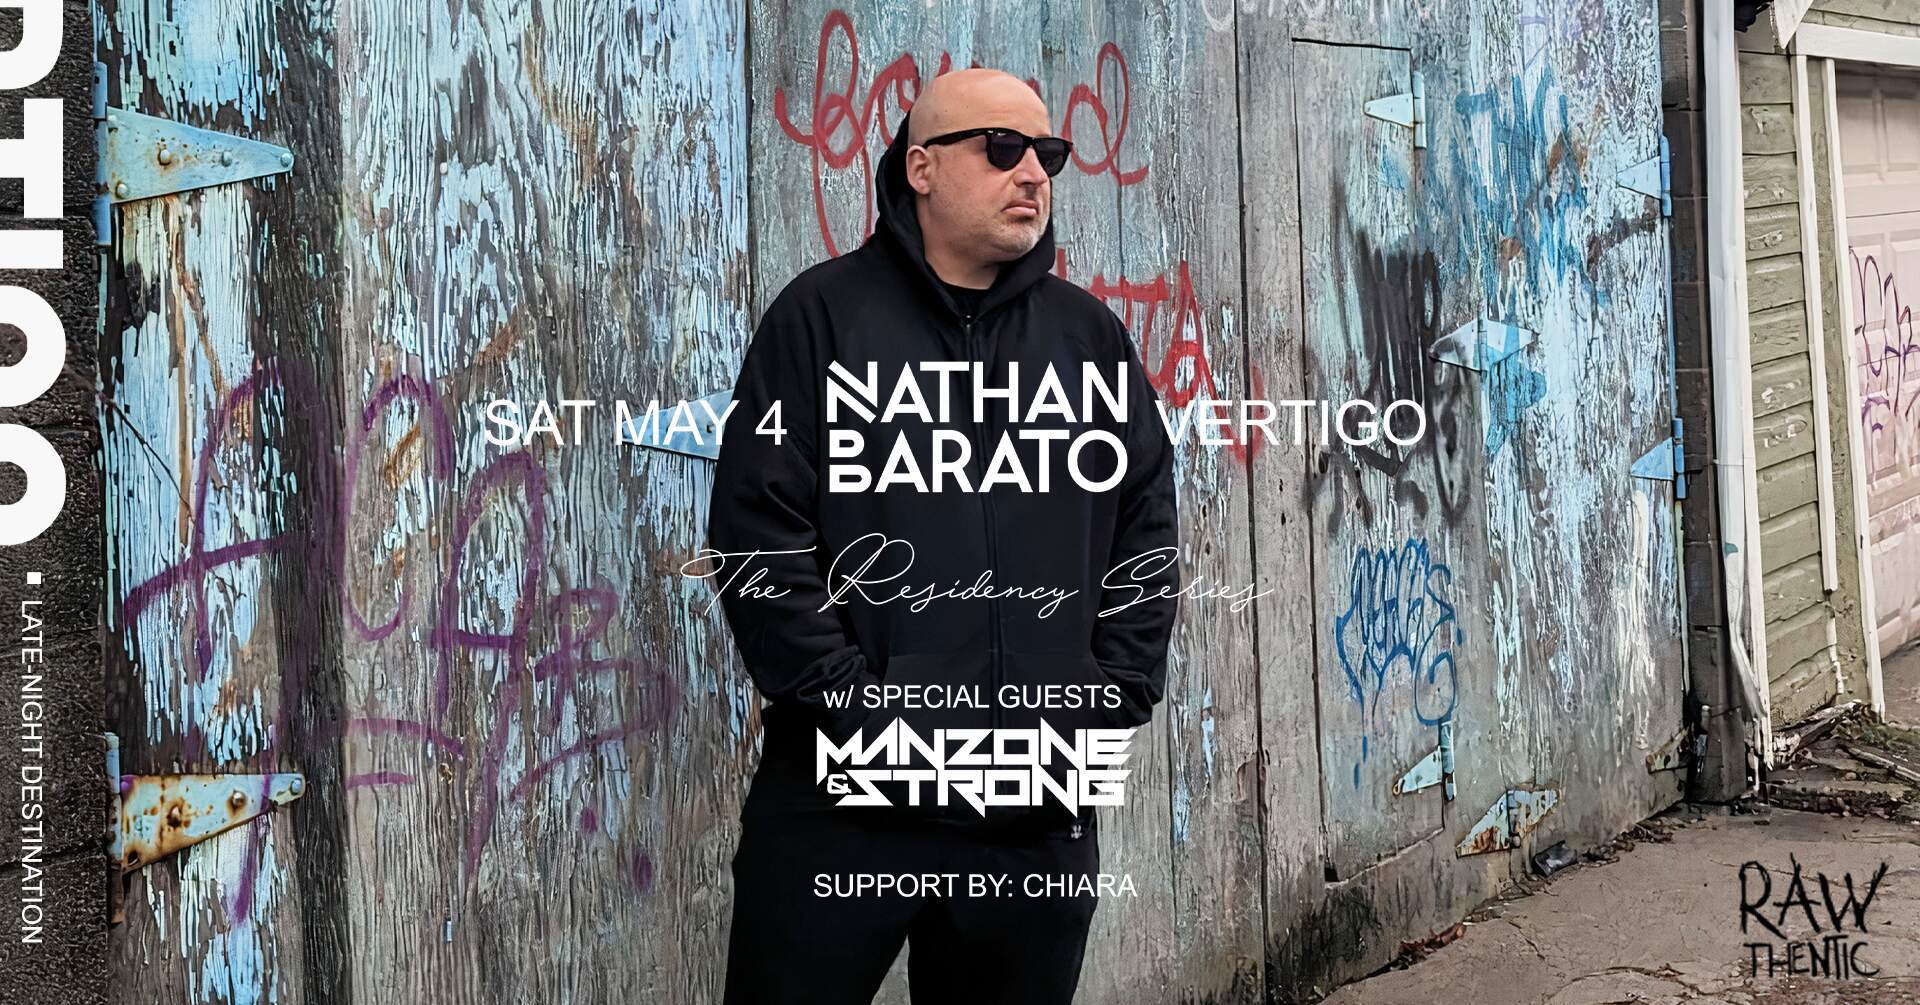 Nathan Barato - The Residency Series - フライヤー表